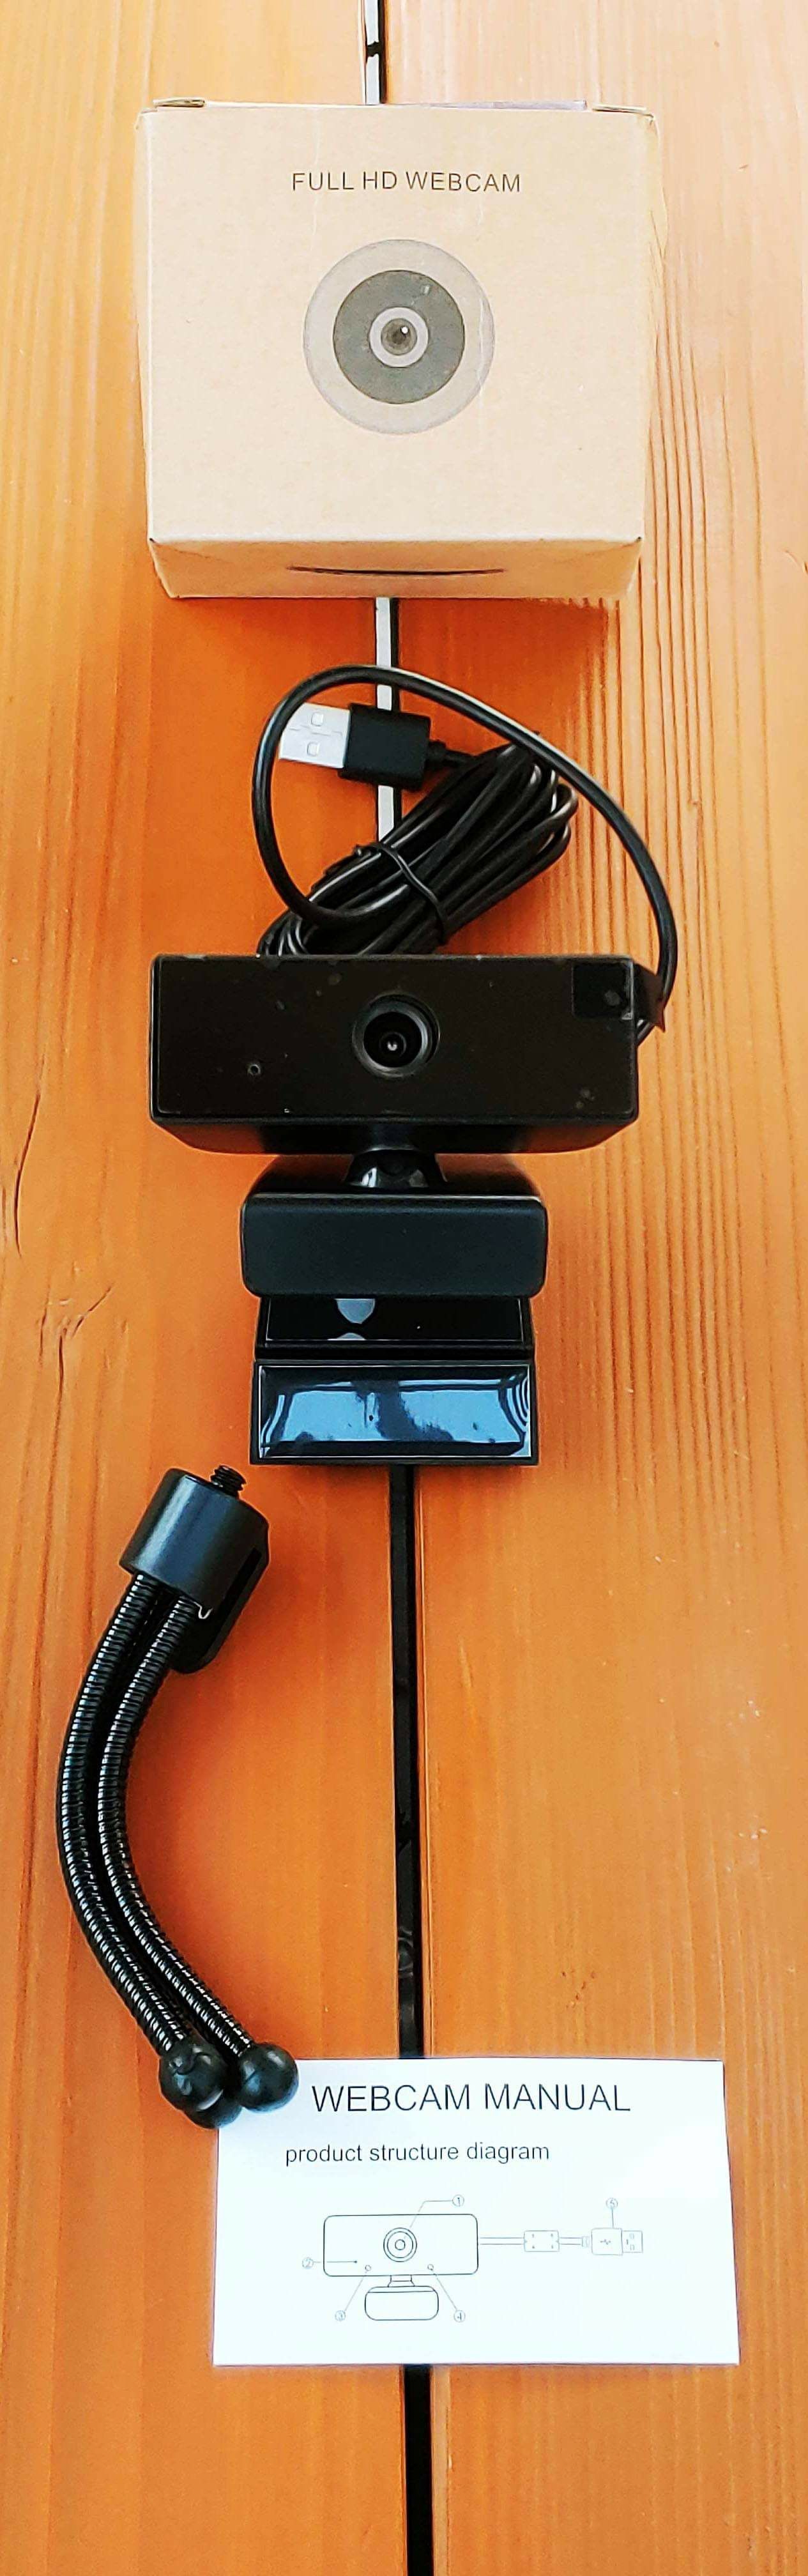 BRAND NEW Full HD 1080p Webcam with Microphone & Tripod, Computer Camera Video Calling Conference Online Class Business Meeting, Plug & Play USB Web